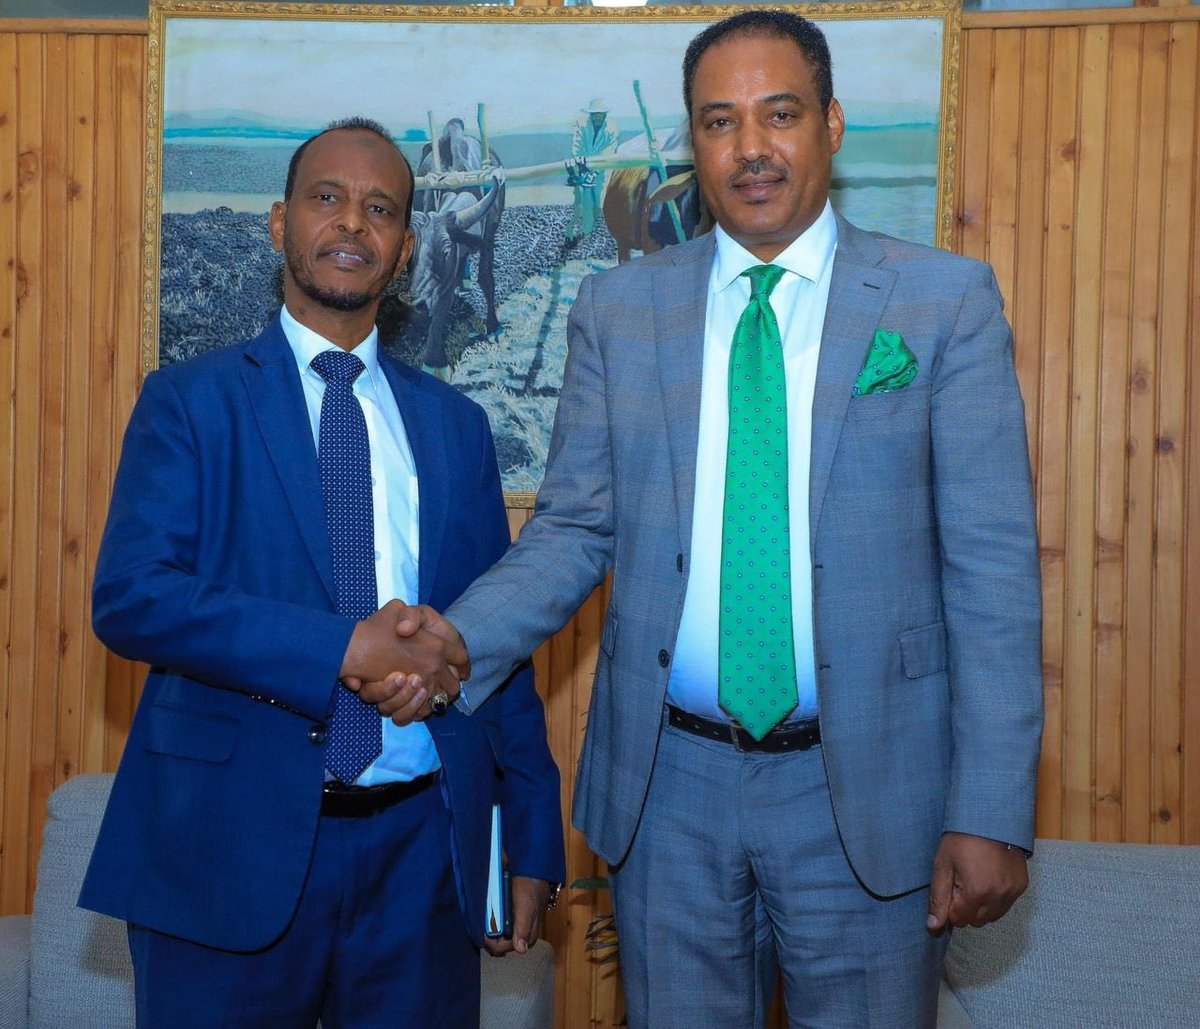 Cheers, The Sultan of Mahamud Saleiman They put the last Nail to the coffin of the failed state of Somalia. Can HSM condemn them. Surly, He Can’t to his Bosses.